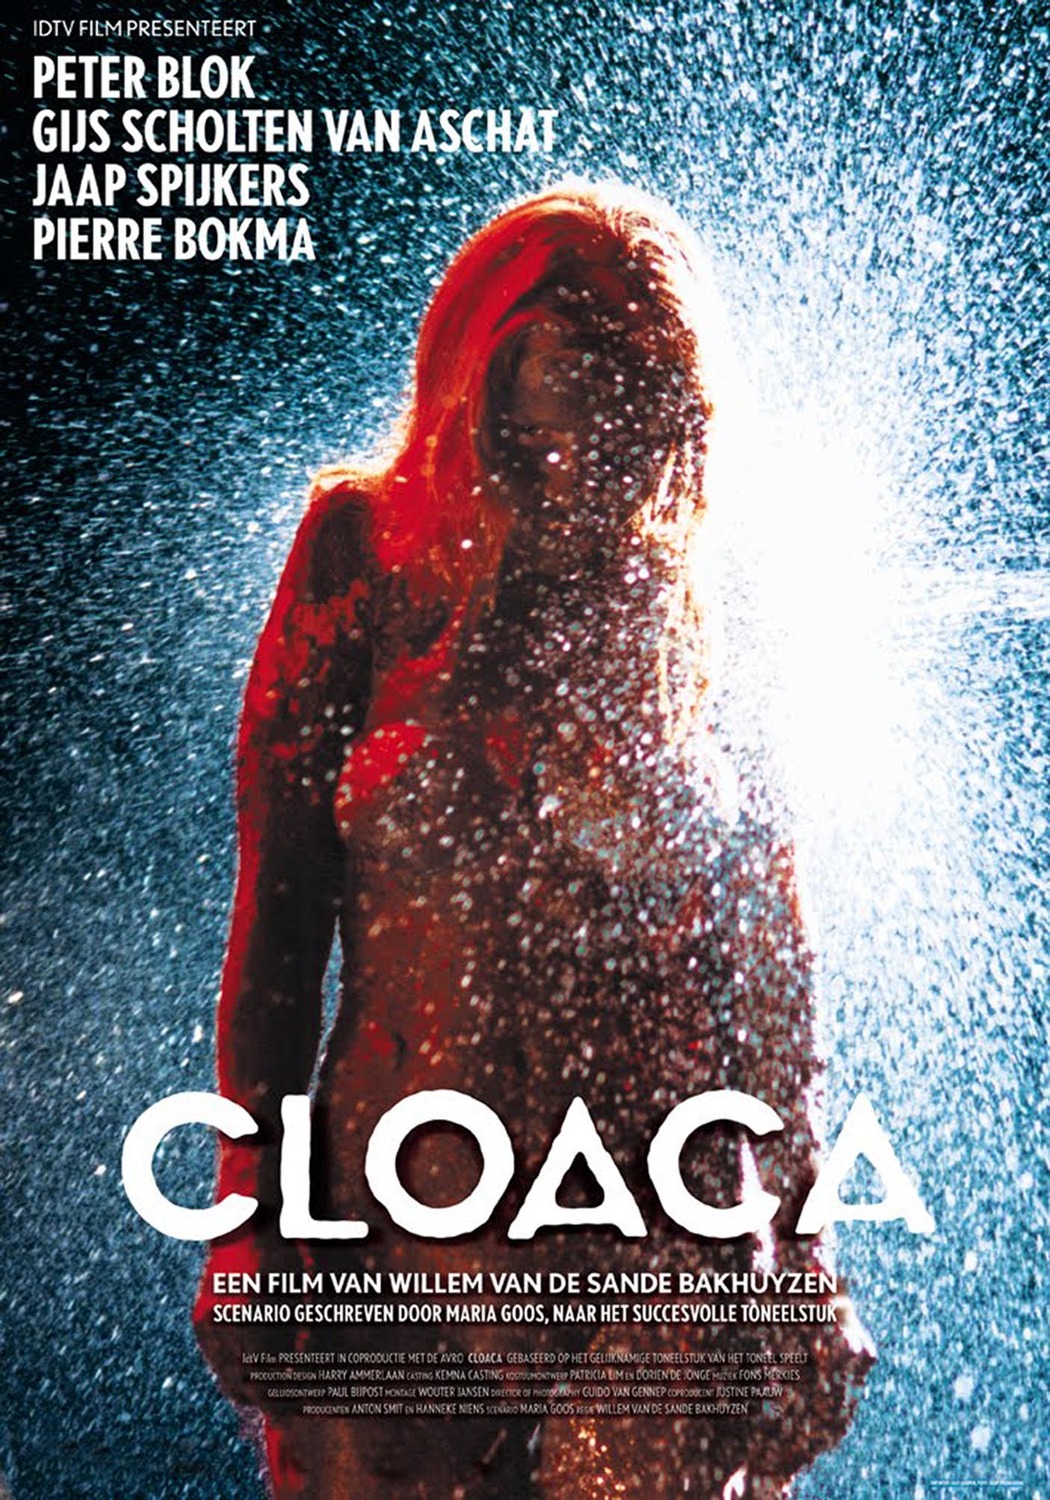 Extra Large TV Poster Image for Cloaca 